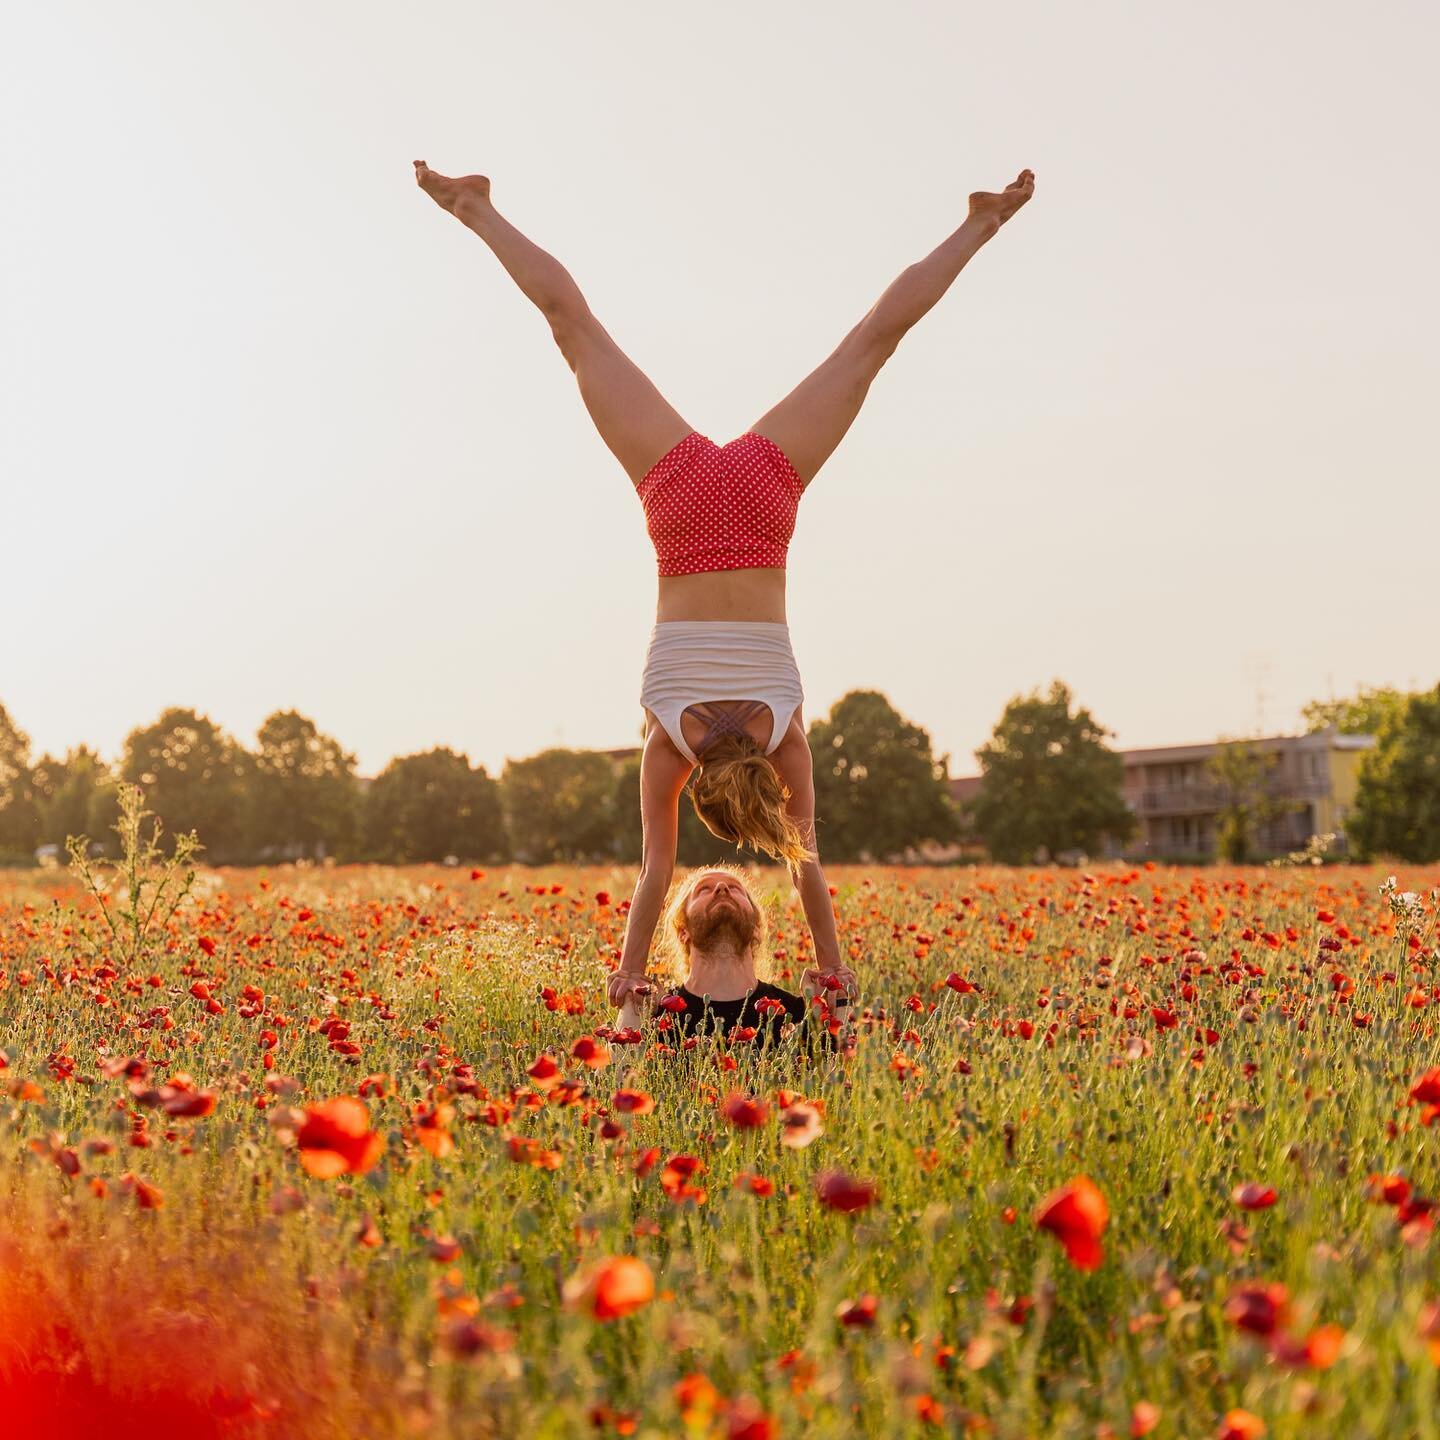 Handstanding in the middle of a poppy field 🥰 One regular handstand and also one arm 💪

This semester we are having two courses that focus on h2h, one intermediate and one advanced. We feel really grateful that there are so many people eager to lea